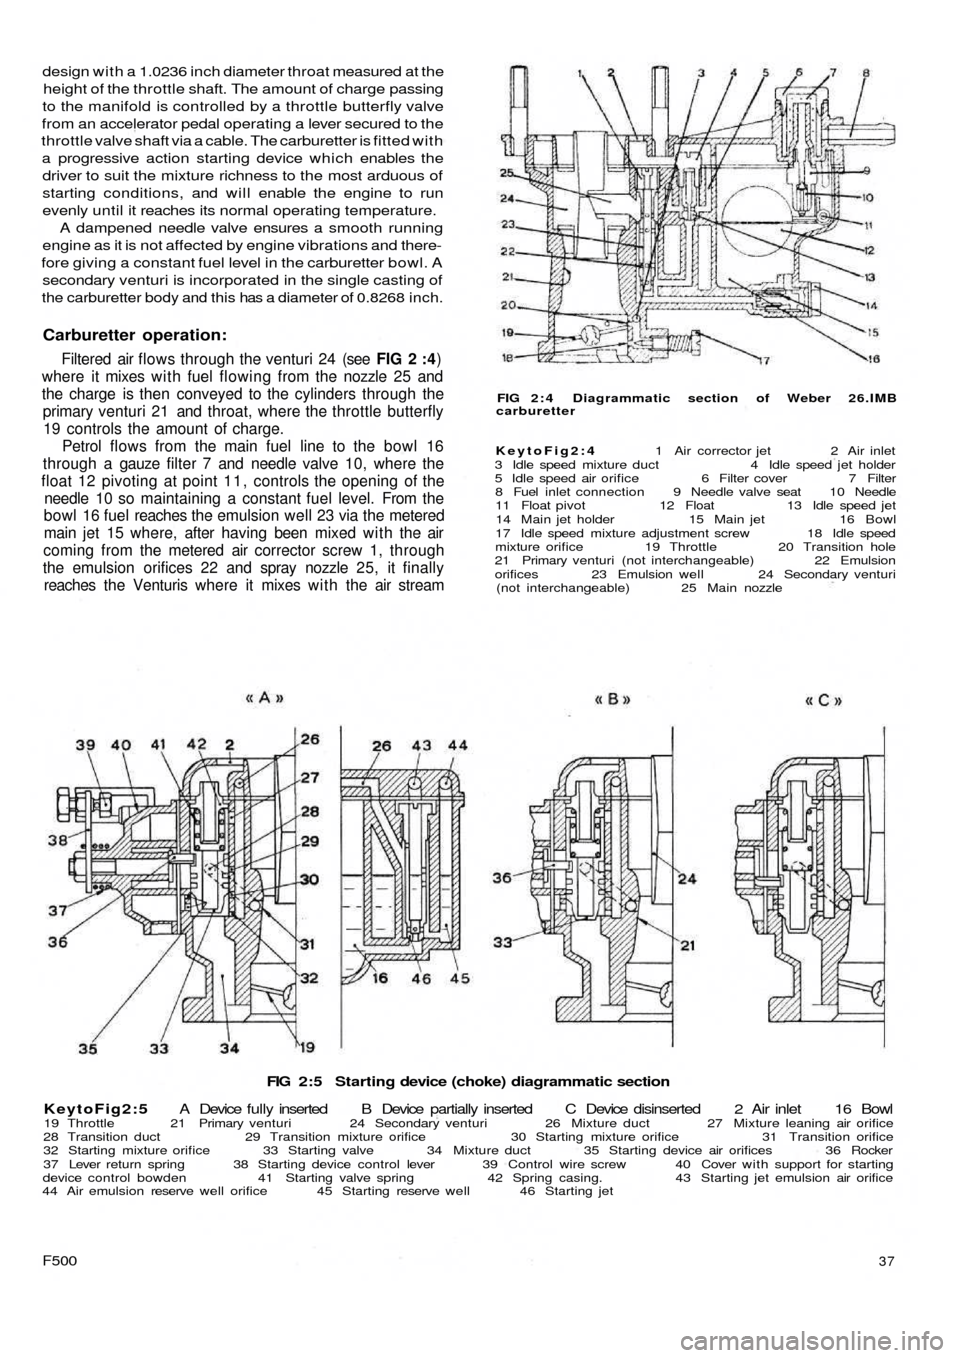 FIAT 500 1970 1.G Workshop Manual FIG 2:5  Starting device (choke) diagrammatic section
KeytoFig2:5 A  Device  fully inserted  B  Device  partially  inserted  C  Device  disinserted  2  Air  inlet 16 Bowl
19 Throttle  21 Primary ventu